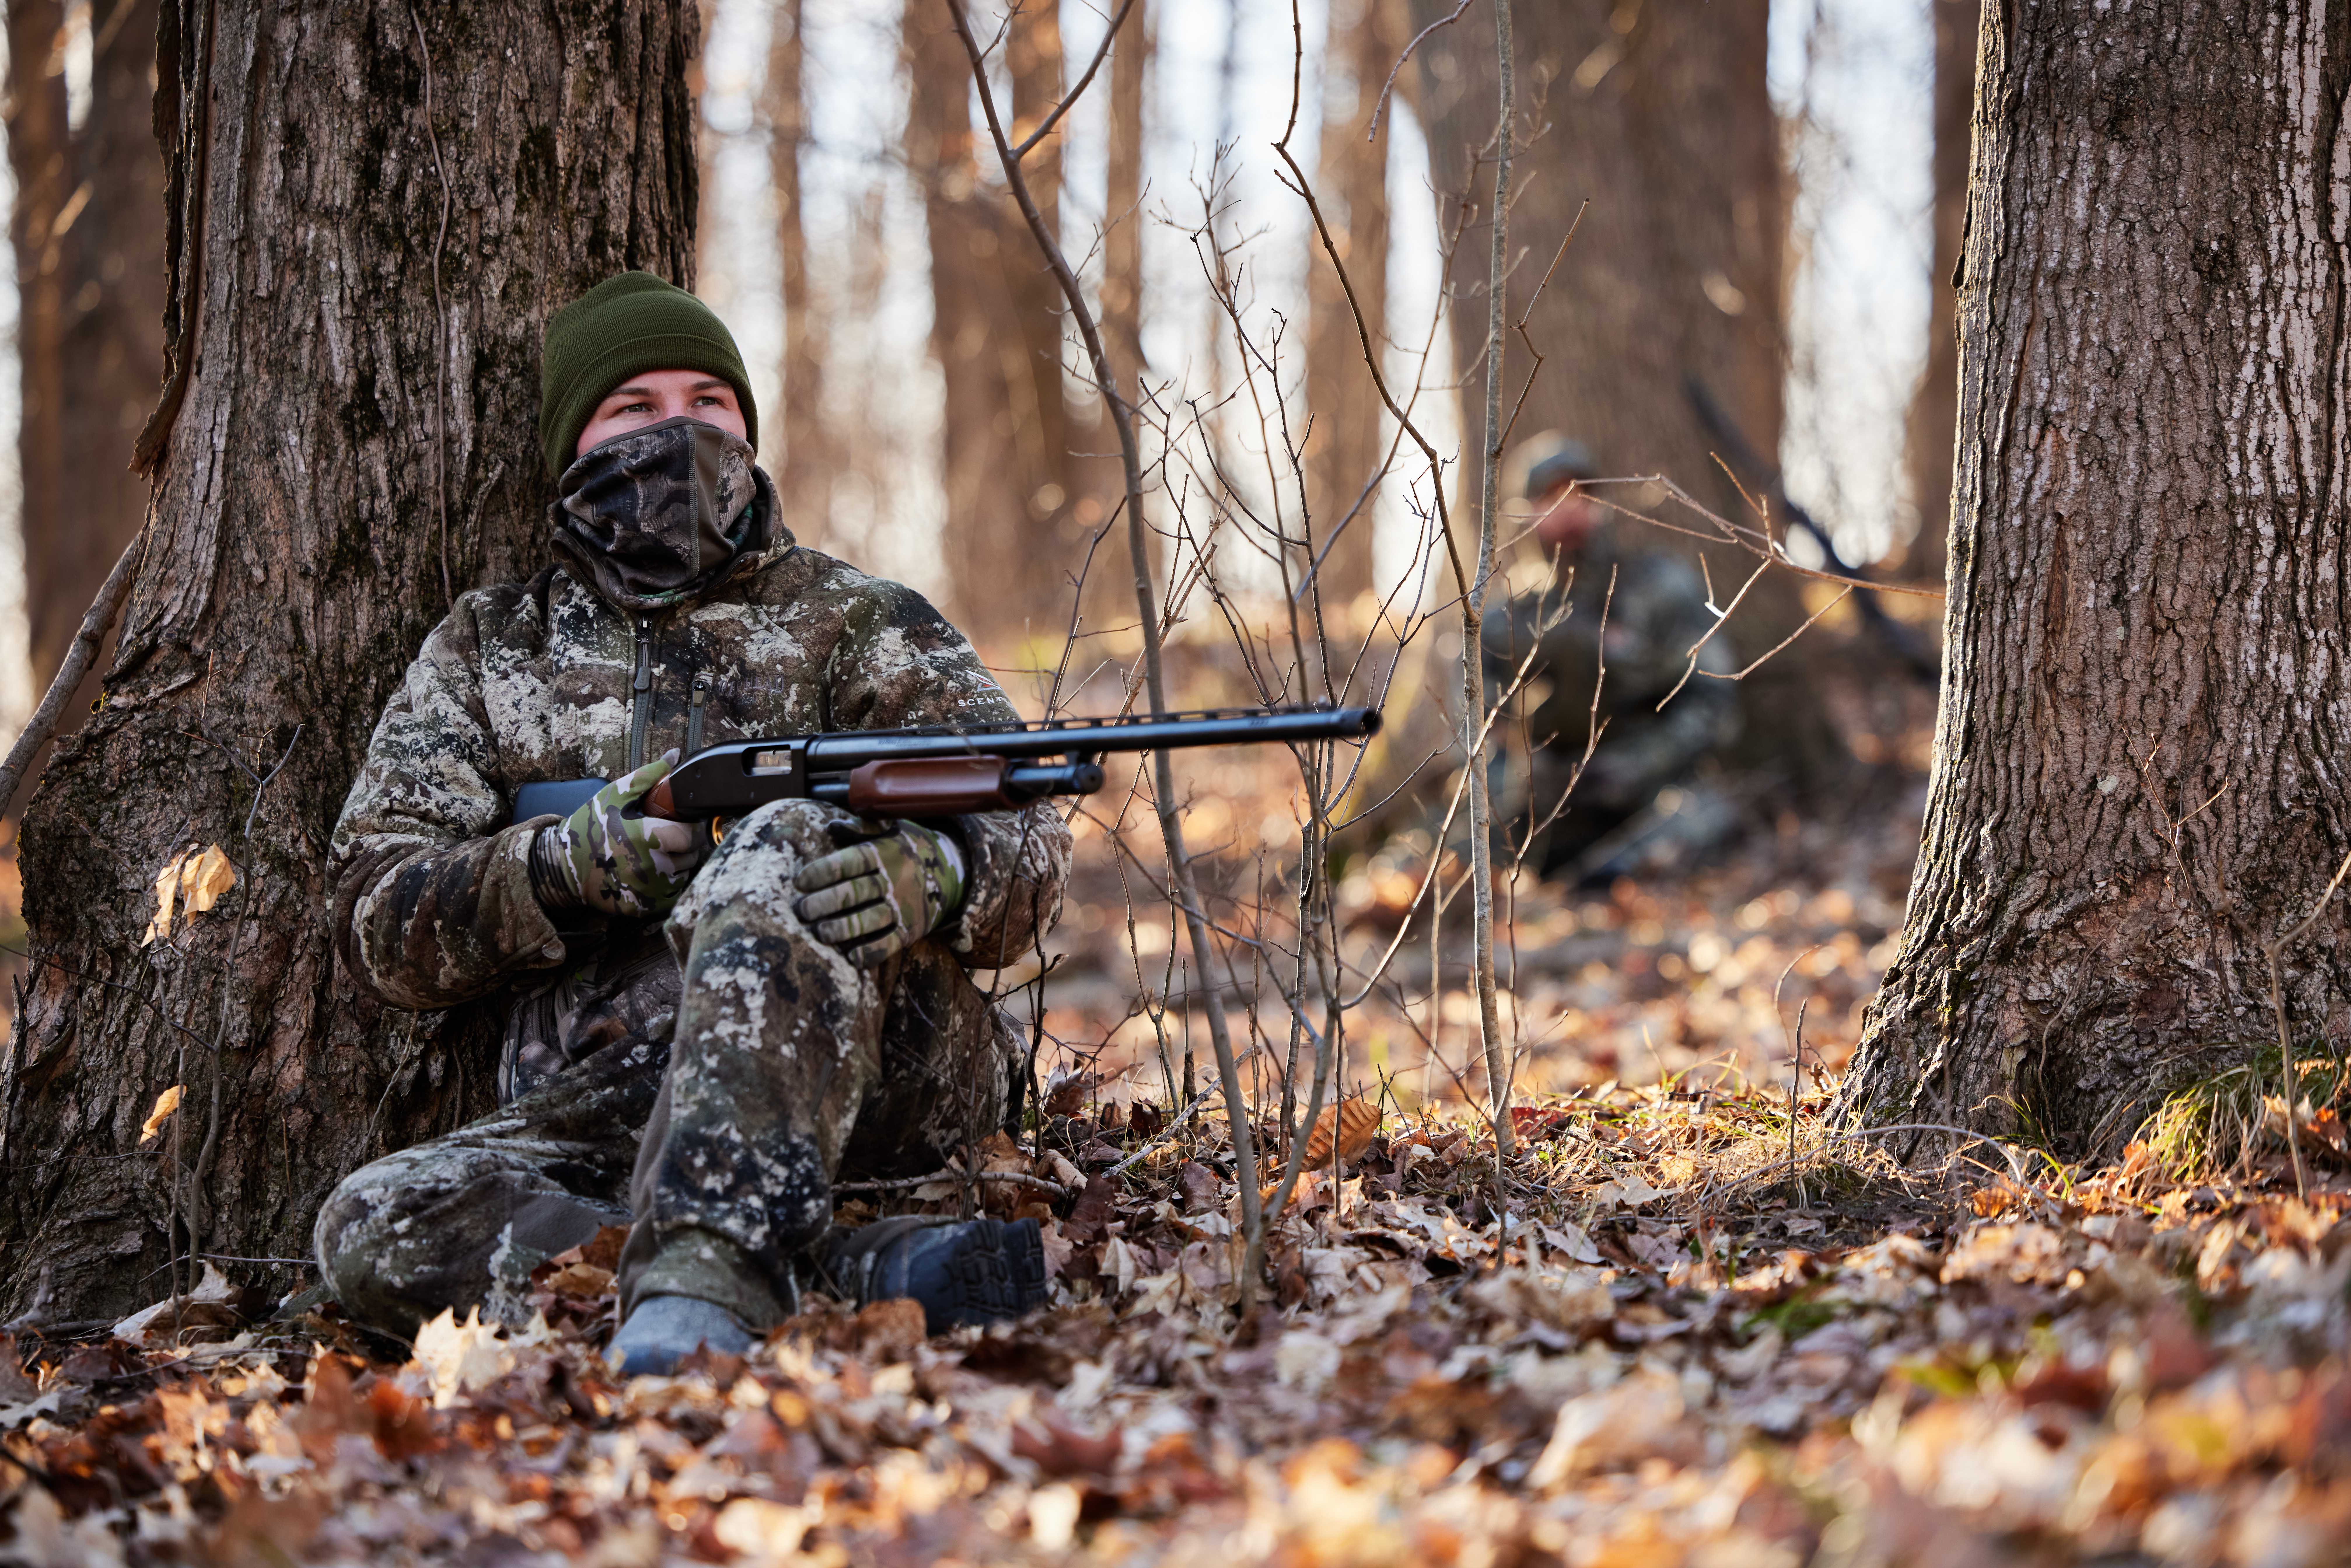 Hunters waiting for turkeys in the woods, turkey hunting concept. 